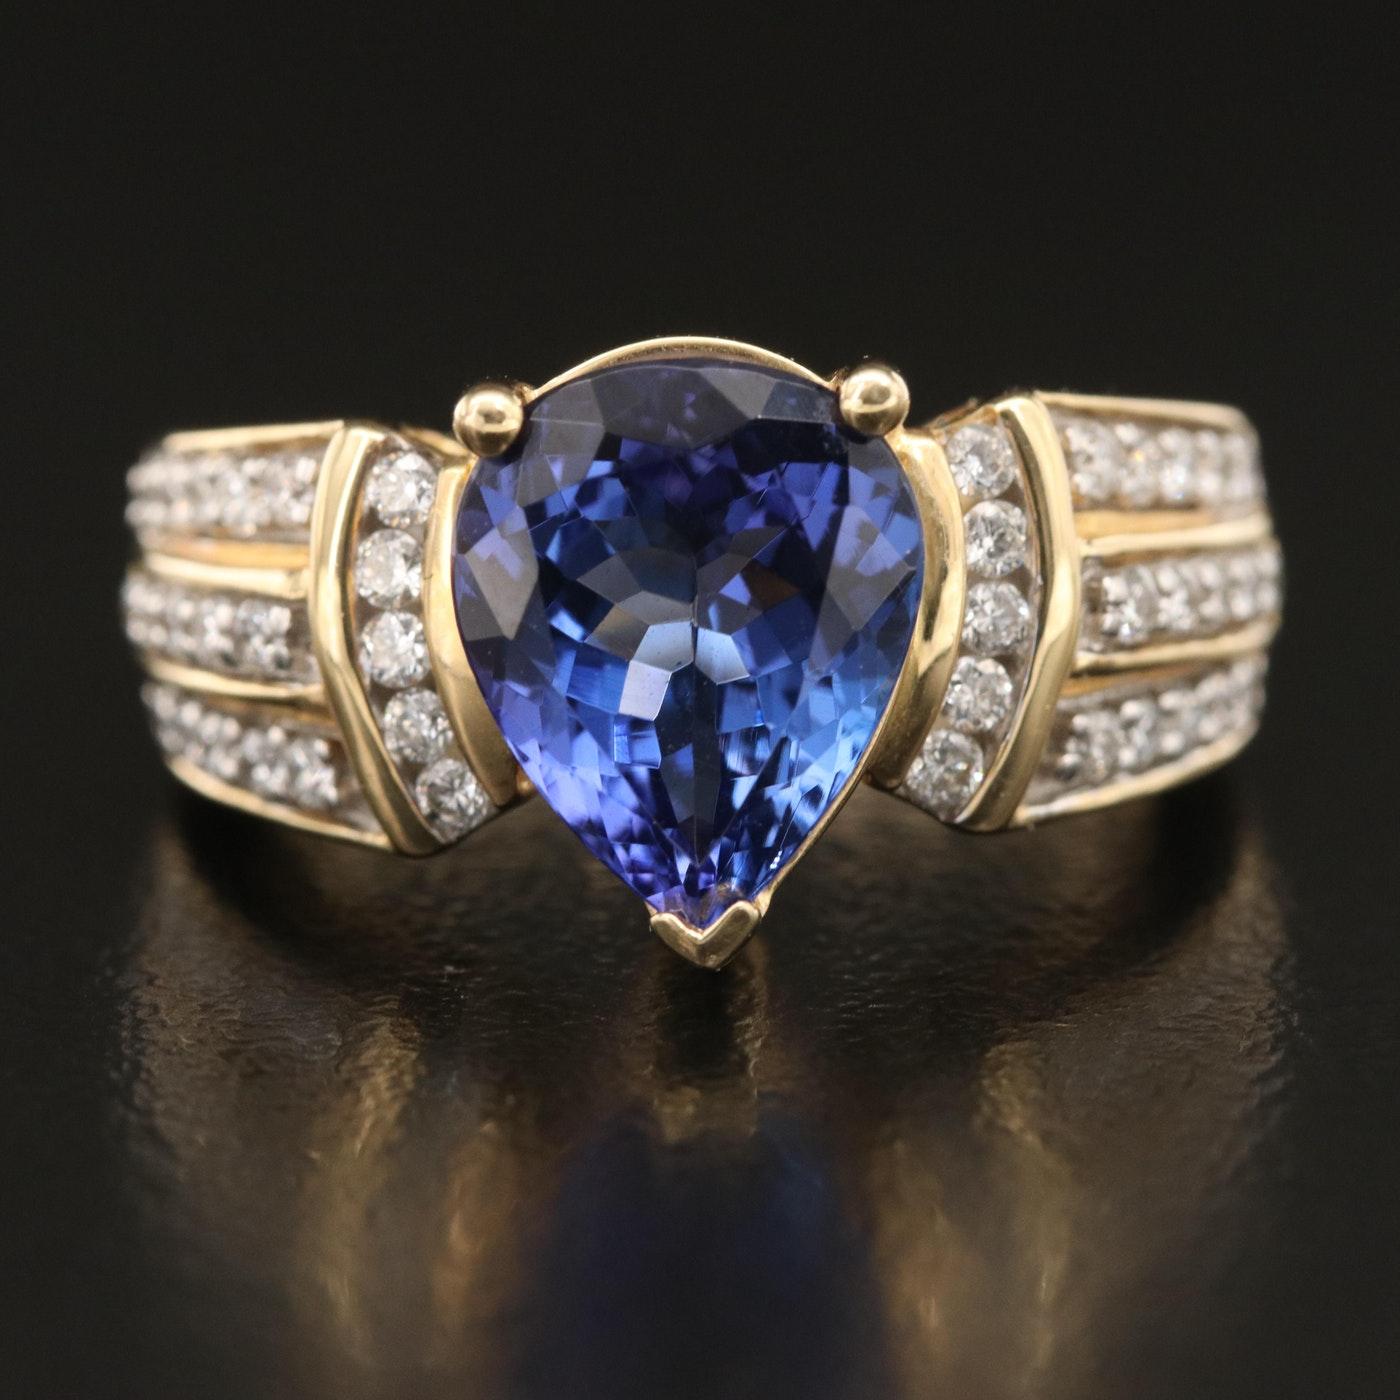 Excellent Condition 

Materials: 14K Gold
Ring Size: 7.25
Hallmarks: 14K KRN TZ3.37ct
Total Weight (grams): 8.70
  
Primary Stone(s) Type: Tanzanite
Primary Stone(s) Shape: Pear, Faceted
Primary Stone(s) Dimensions:(11.17) mm x 8.88 mm x 4.80 mm -